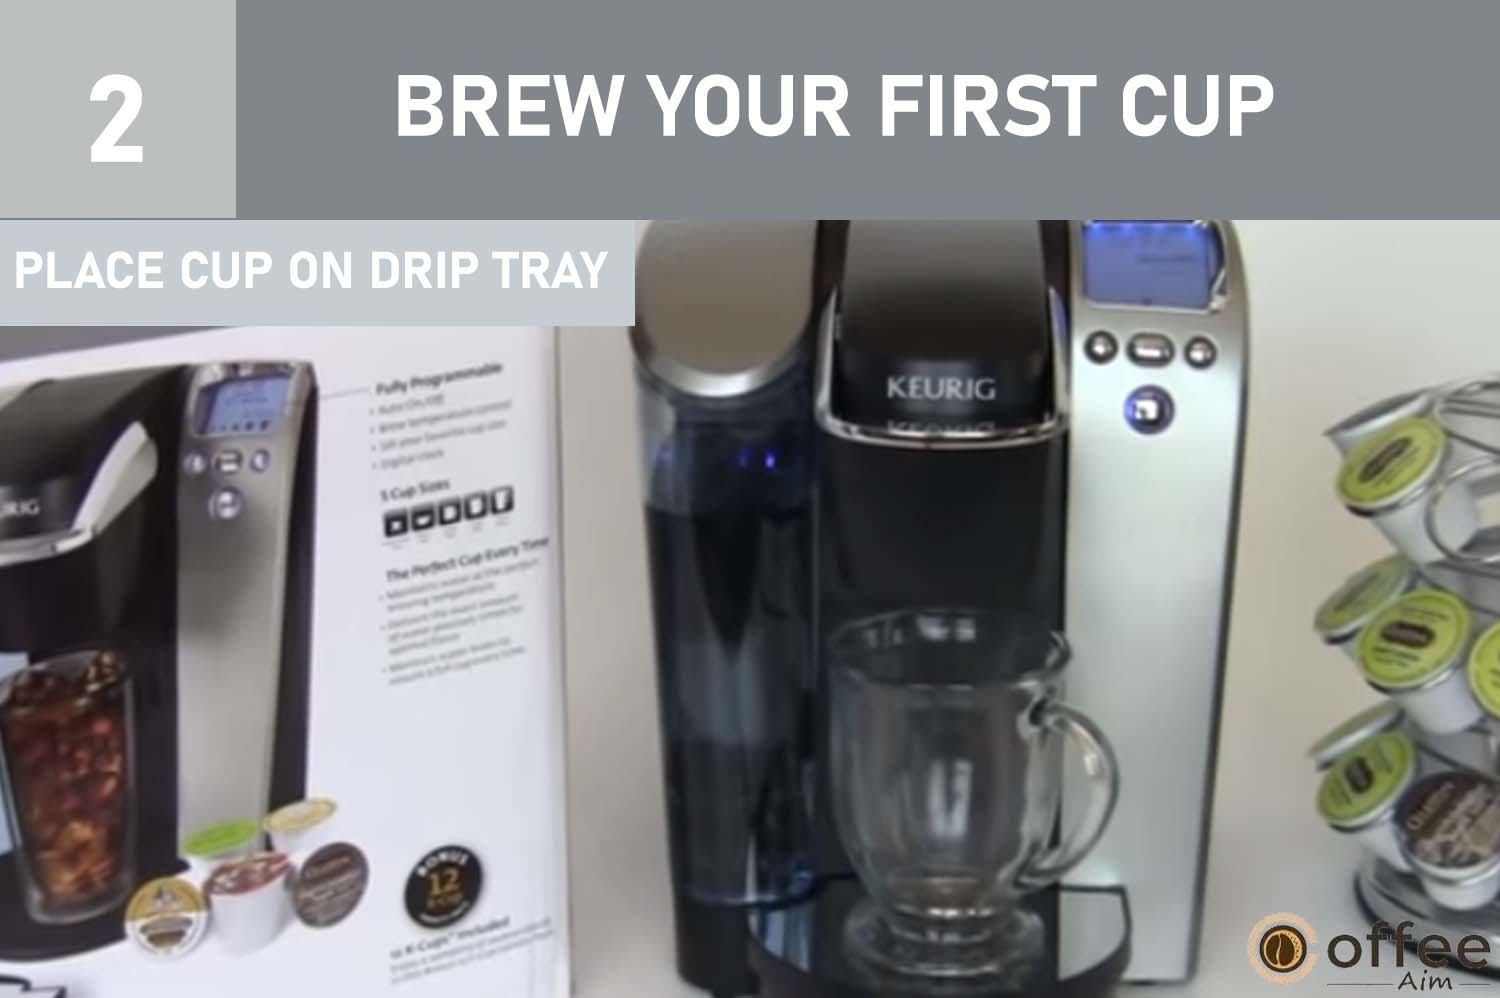 Get ready for brewing by placing a cup or mug on the Drip Tray Plate, ensuring it's in position to receive your freshly brewed coffee.